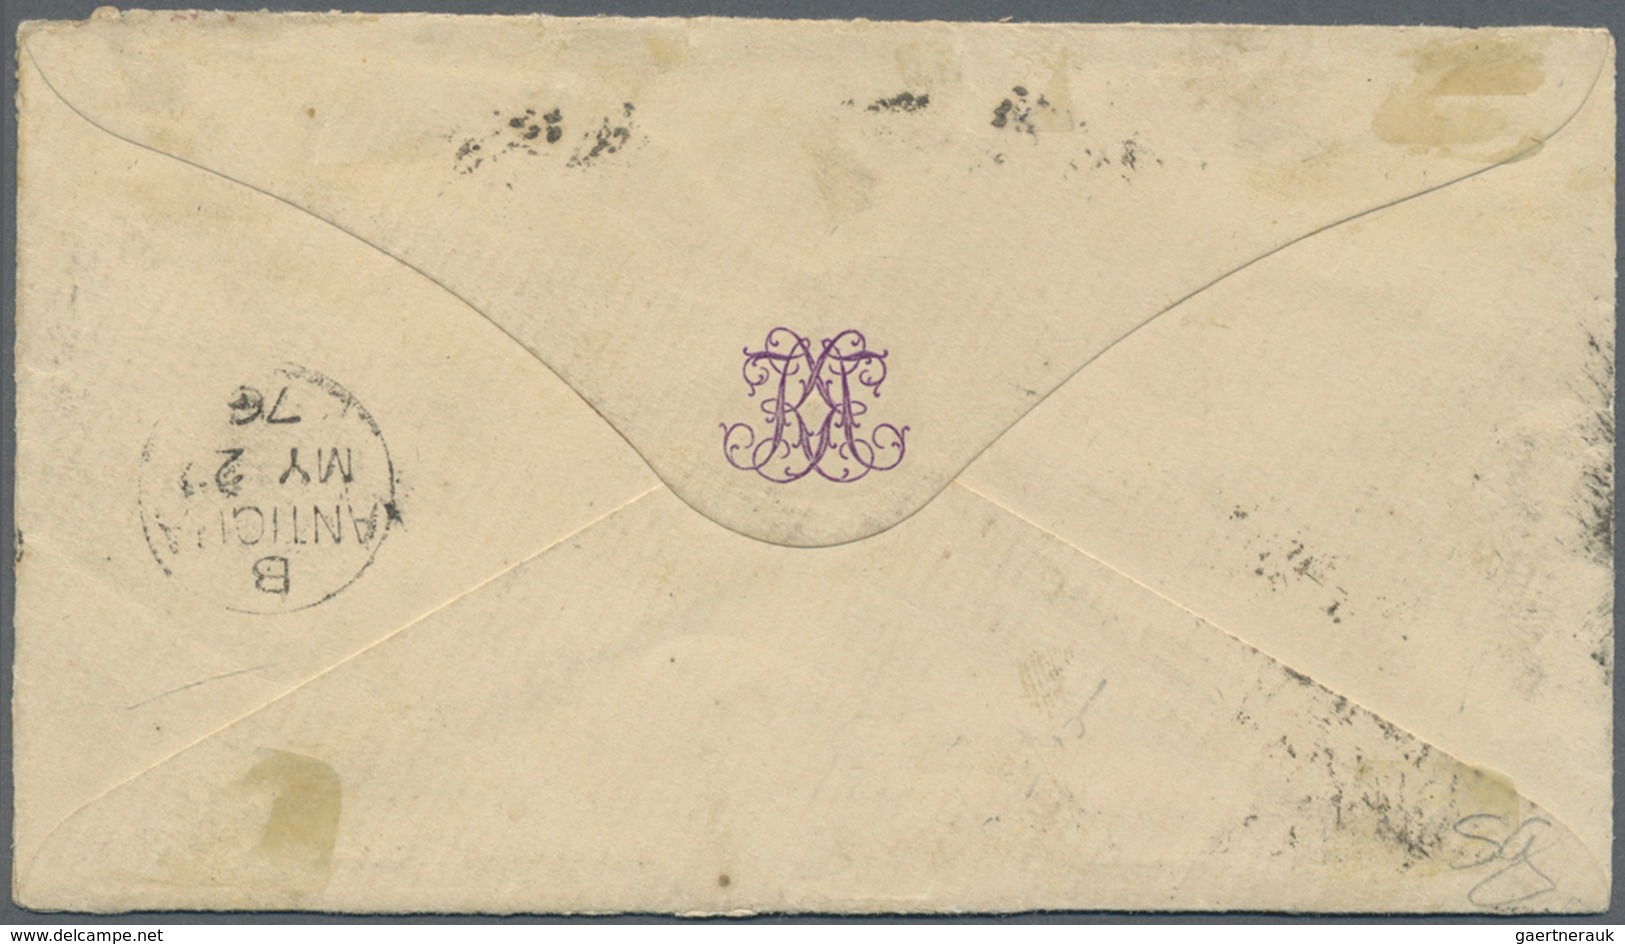 Br Antigua: 1876, QV 6d Perf. 12 1/2 (pair) Canc. "A02" On Small Cover With "ANTIGUA MY 29 76" On Rever - 1858-1960 Colonie Britannique